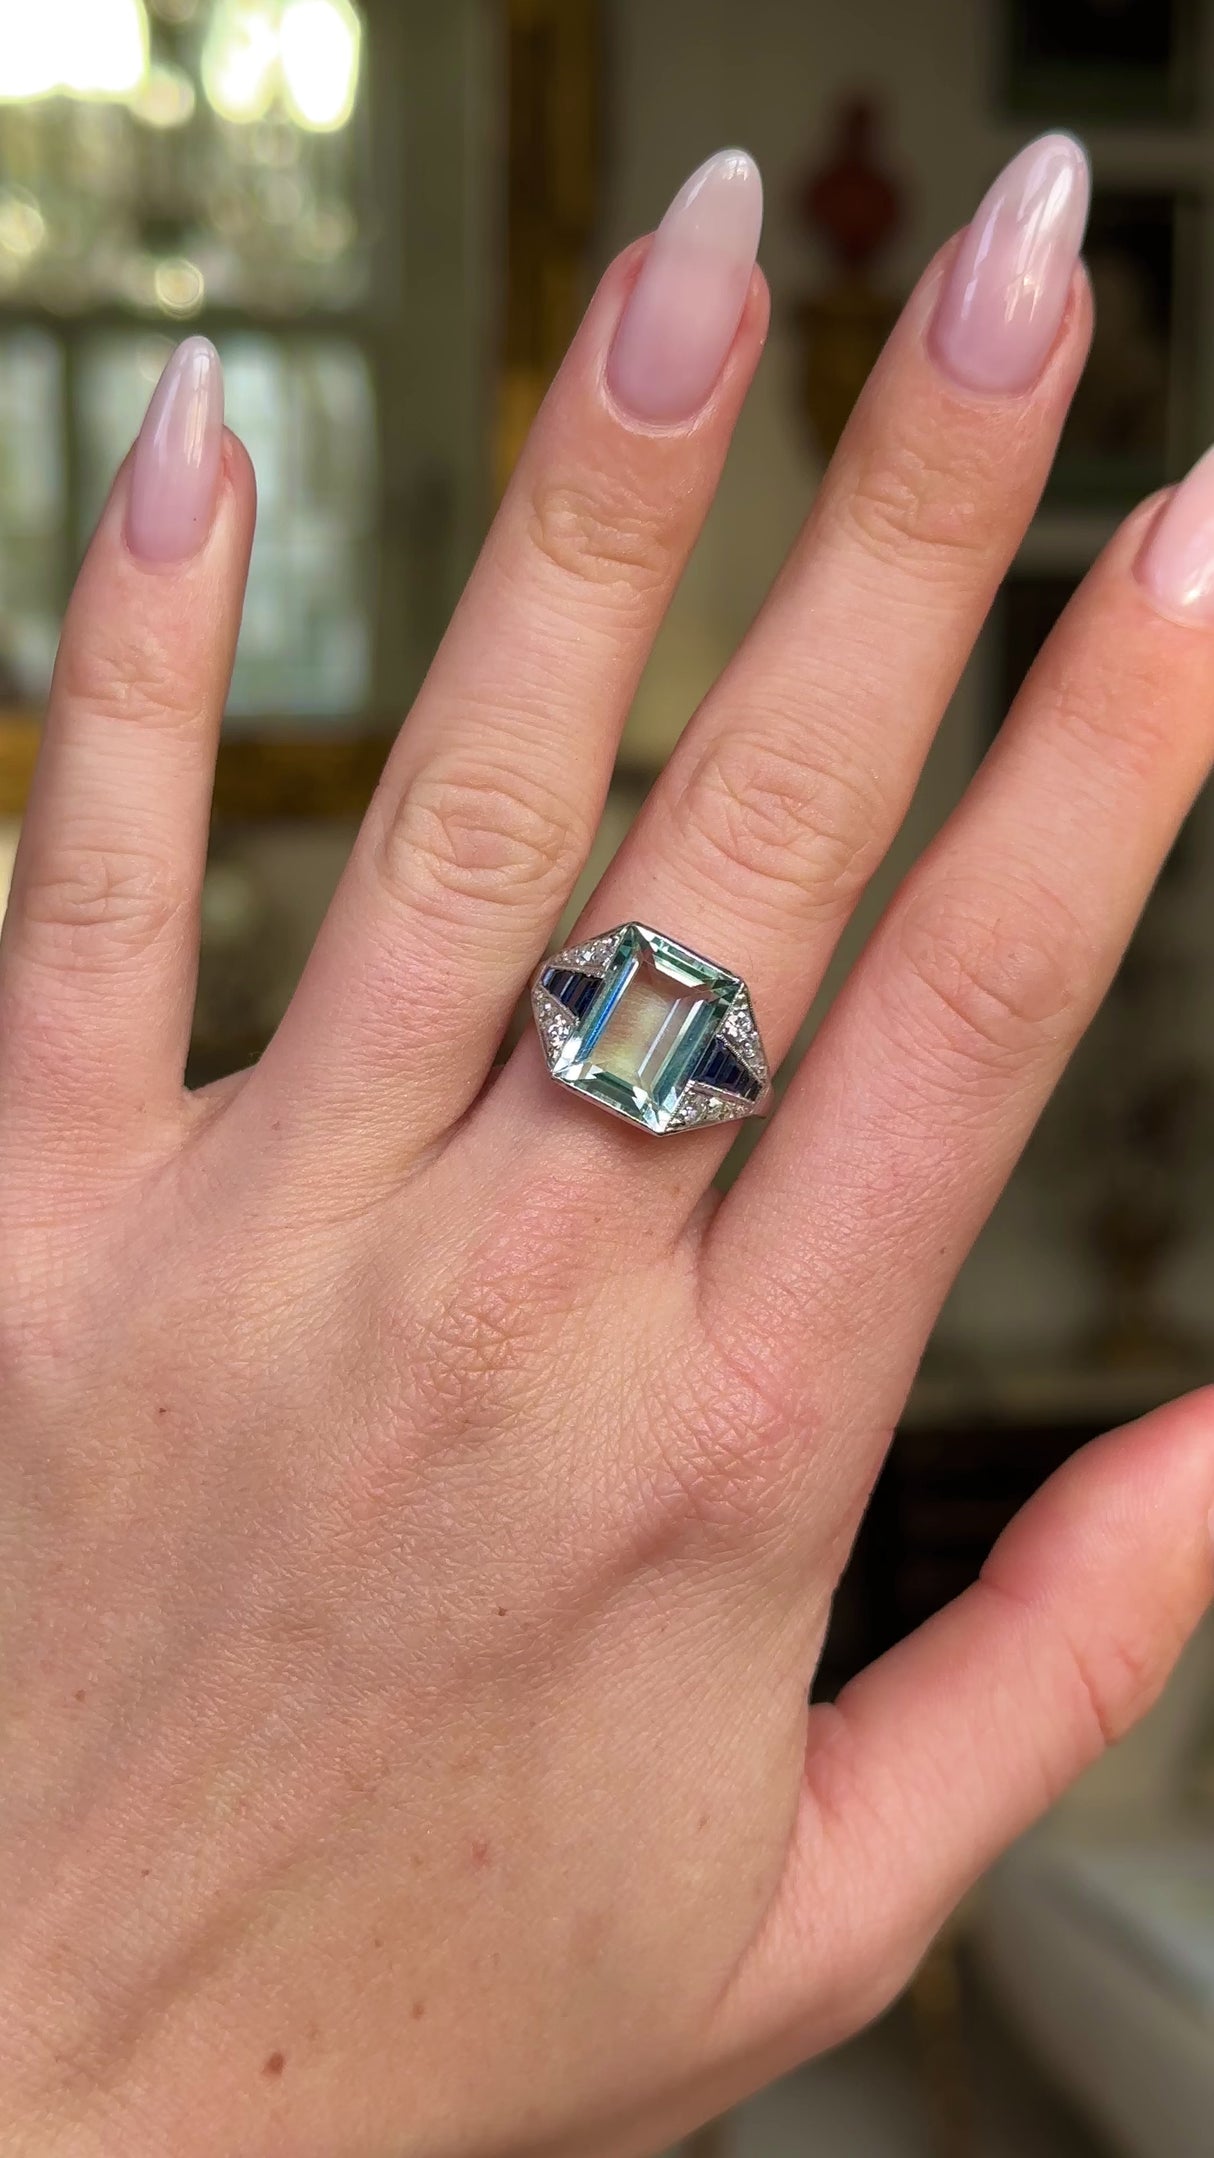 vintage aquamarine, sapphire and diamond ring worn on hand and moved around to give perspective. 